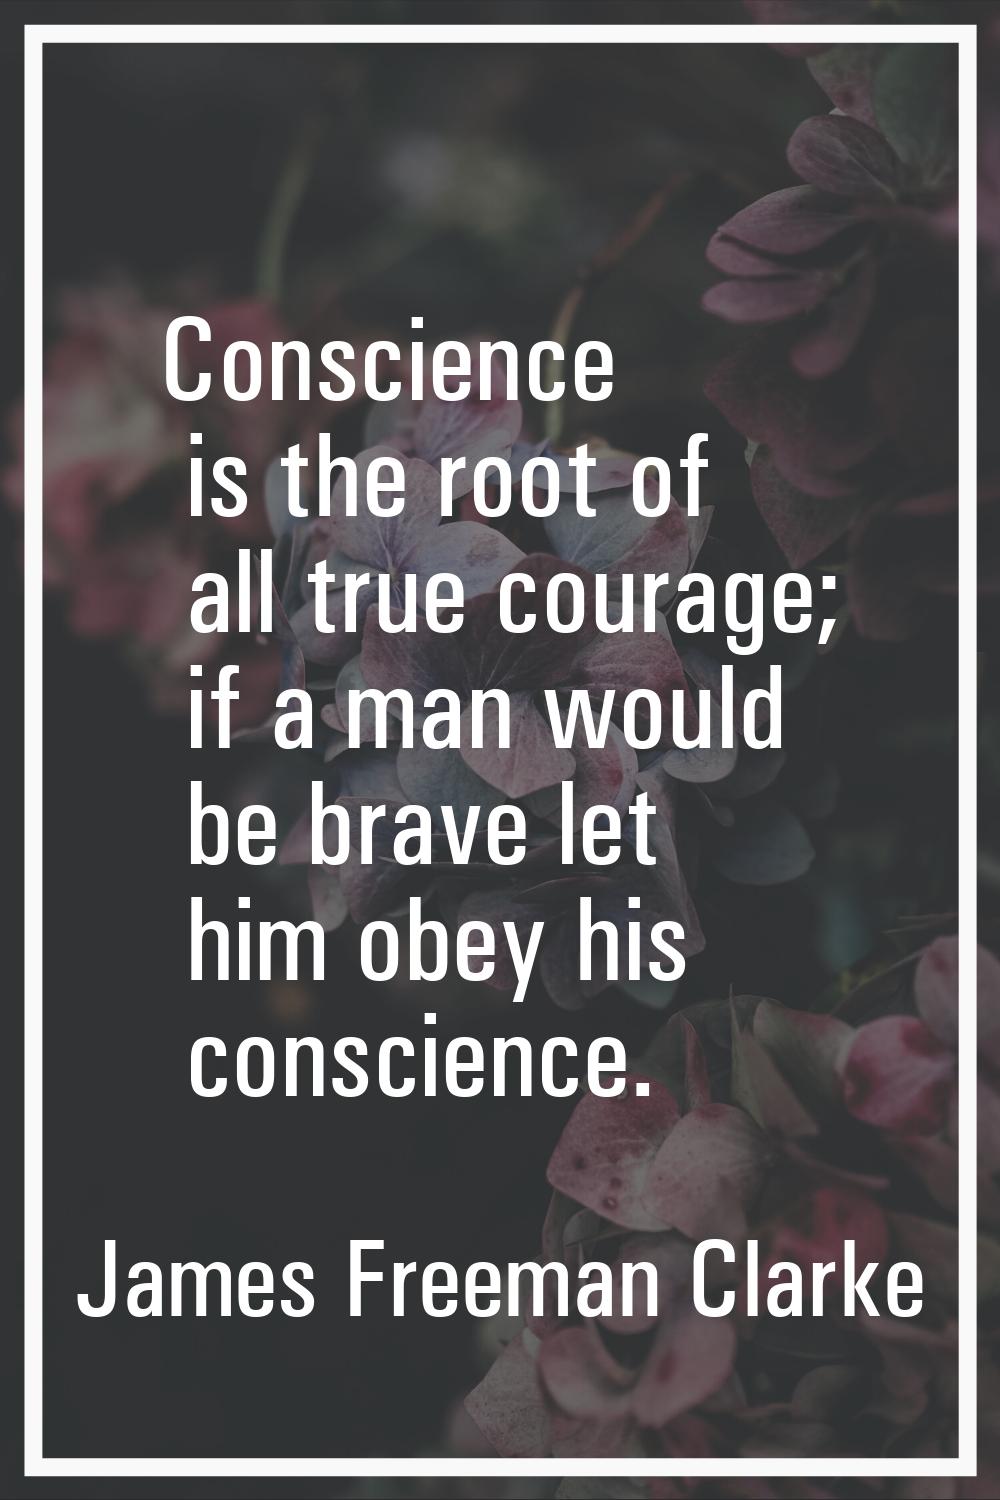 Conscience is the root of all true courage; if a man would be brave let him obey his conscience.